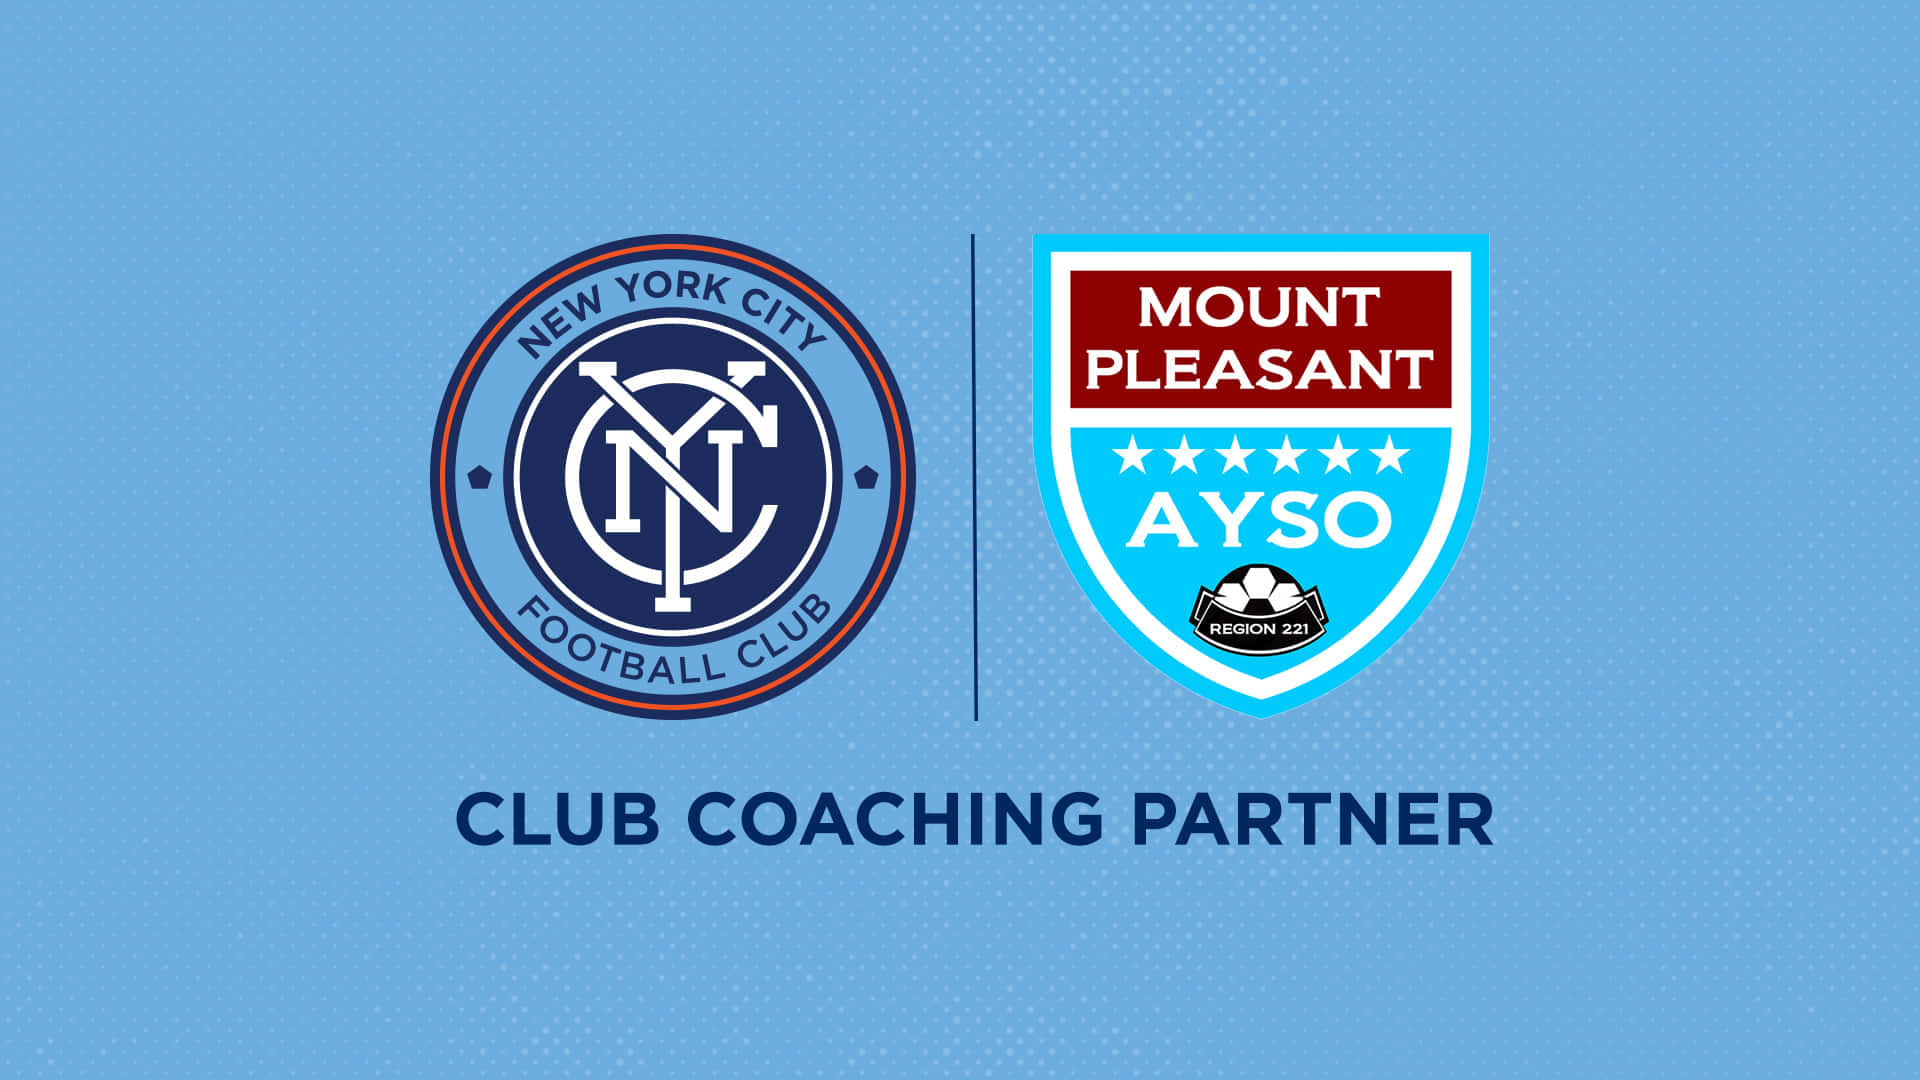 New York City FC And Mount Pleasant AYSO Partnership Wallpaper